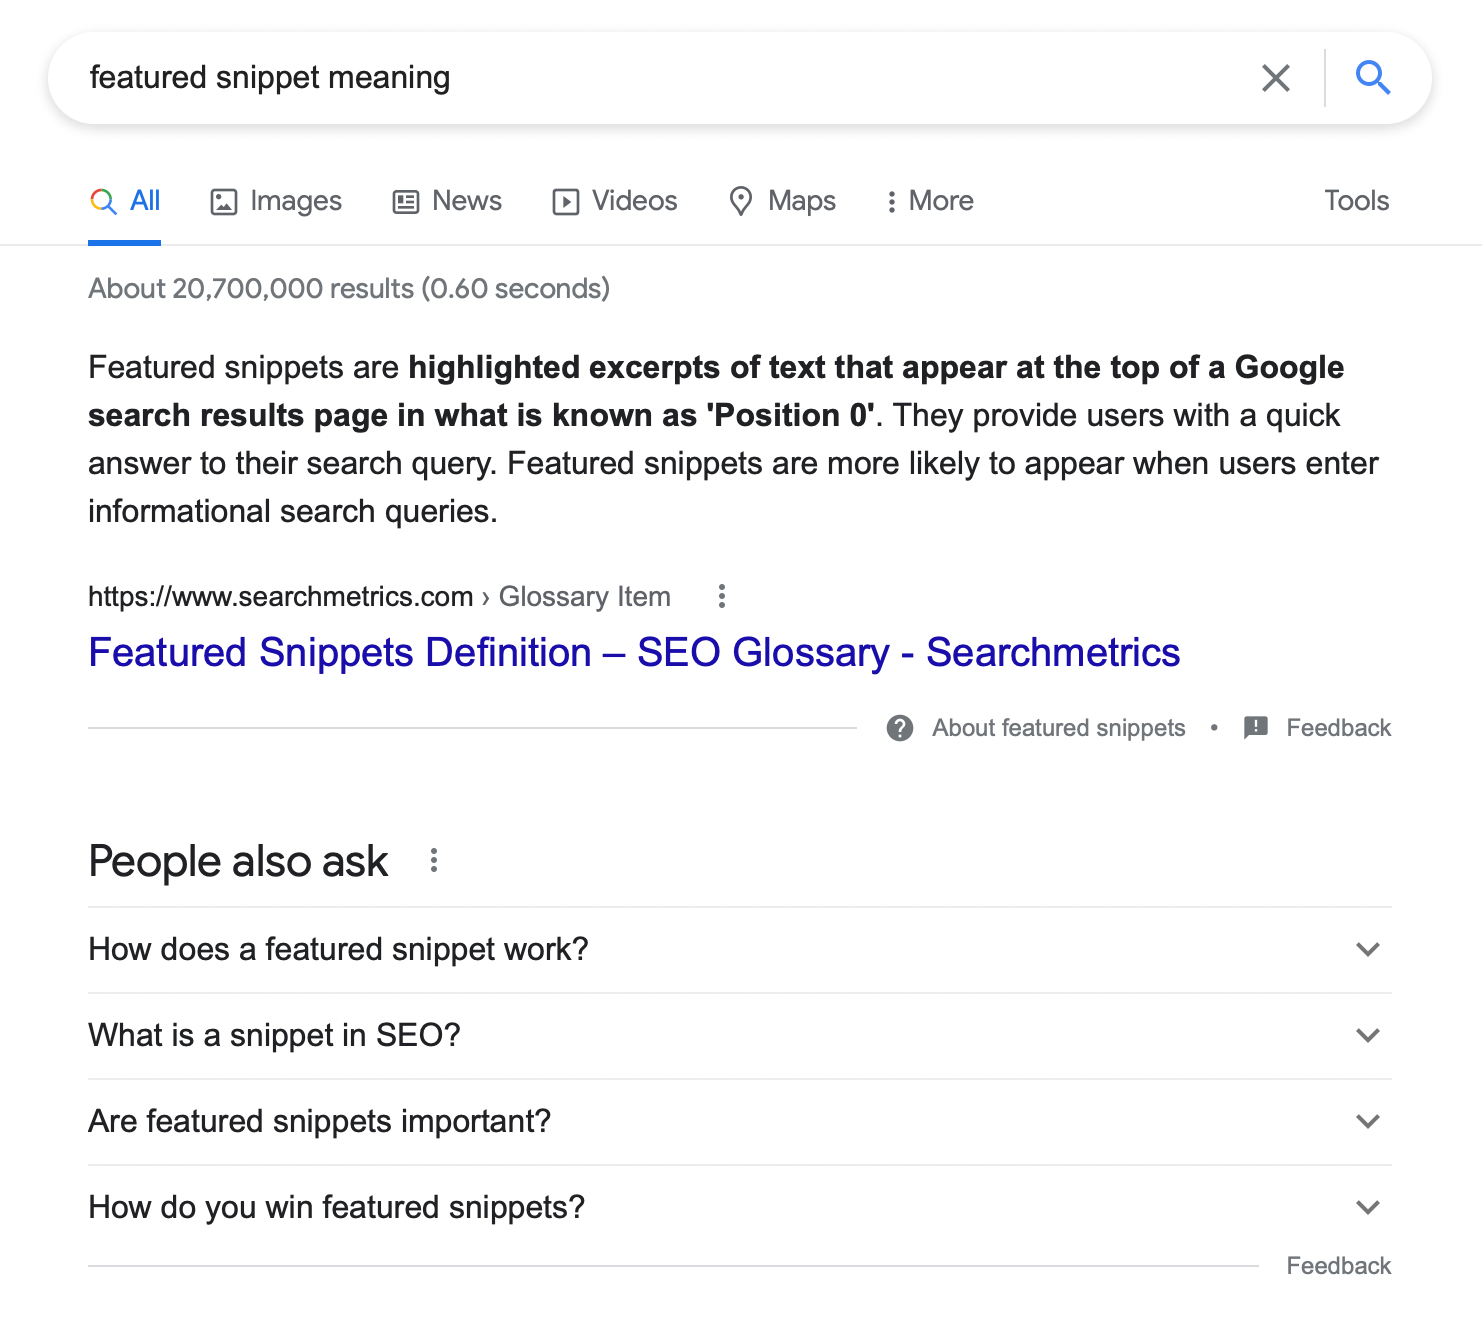 Featured Snippet and People Also Ask are both important SERP features that can help your brand gain more visibility.